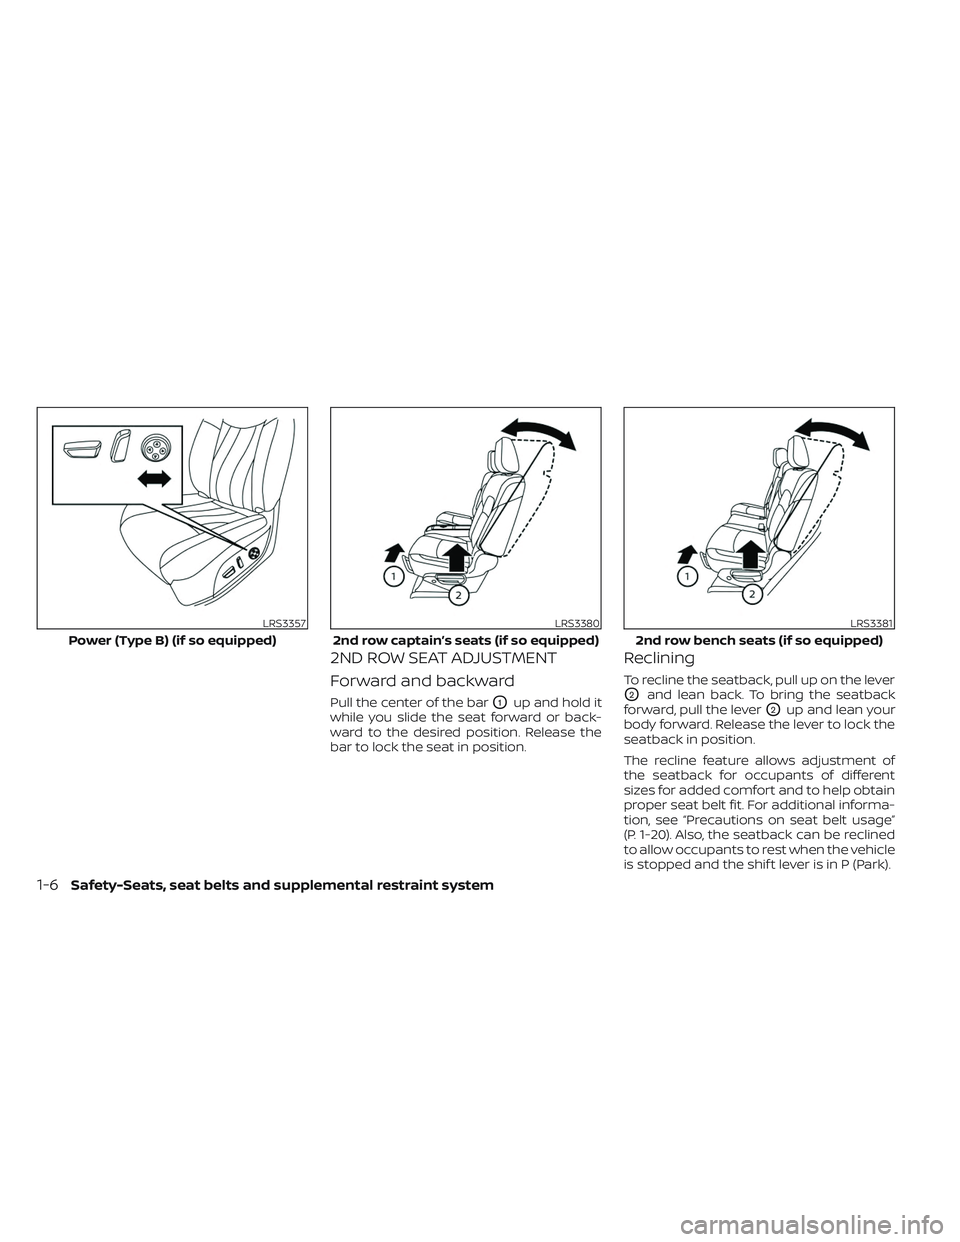 NISSAN PATHFINDER 2022  Owner´s Manual 2ND ROW SEAT ADJUSTMENT
Forward and backward
Pull the center of the barO1up and hold it
while you slide the seat forward or back-
ward to the desired position. Release the
bar to lock the seat in posi